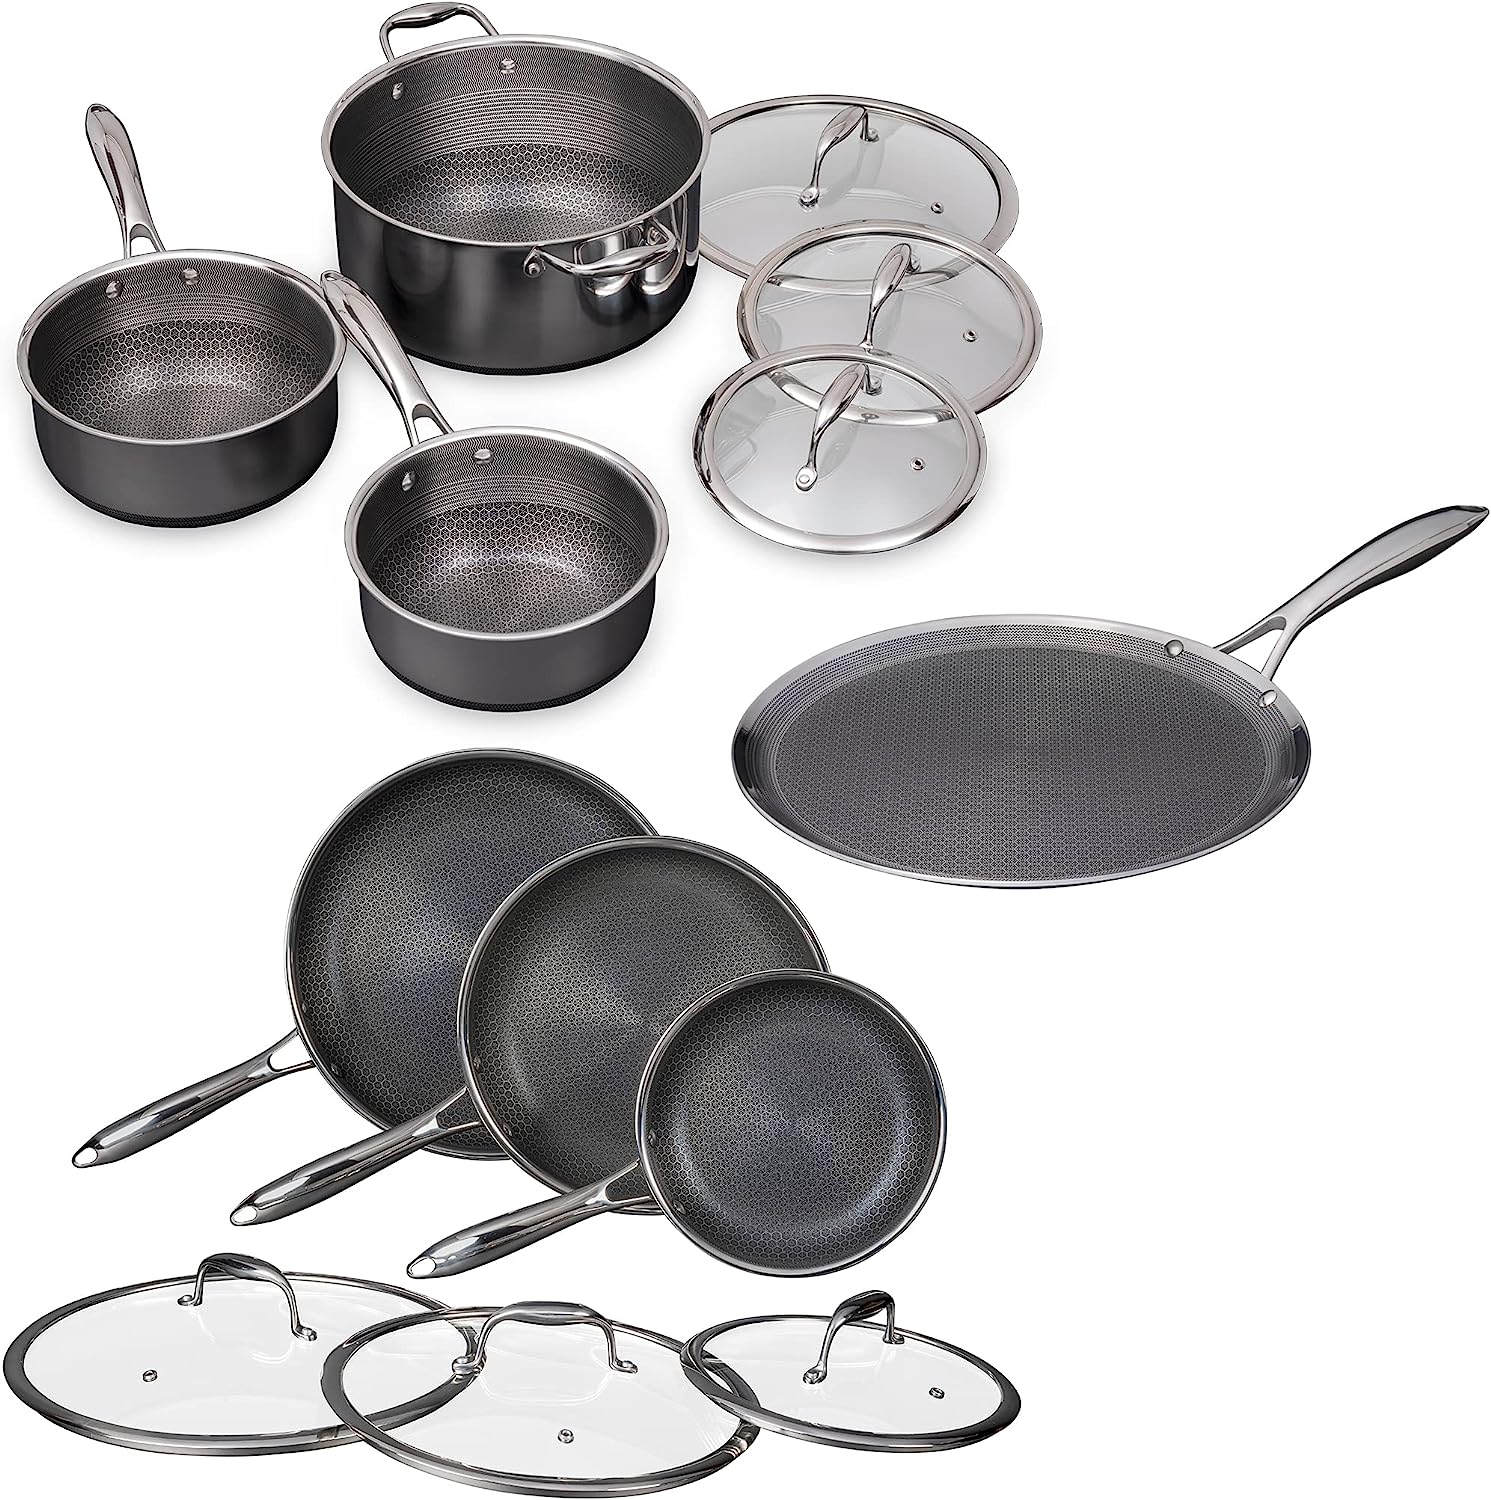 HexClad 13 Piece Hybrid Stainless Steel Cookware Set